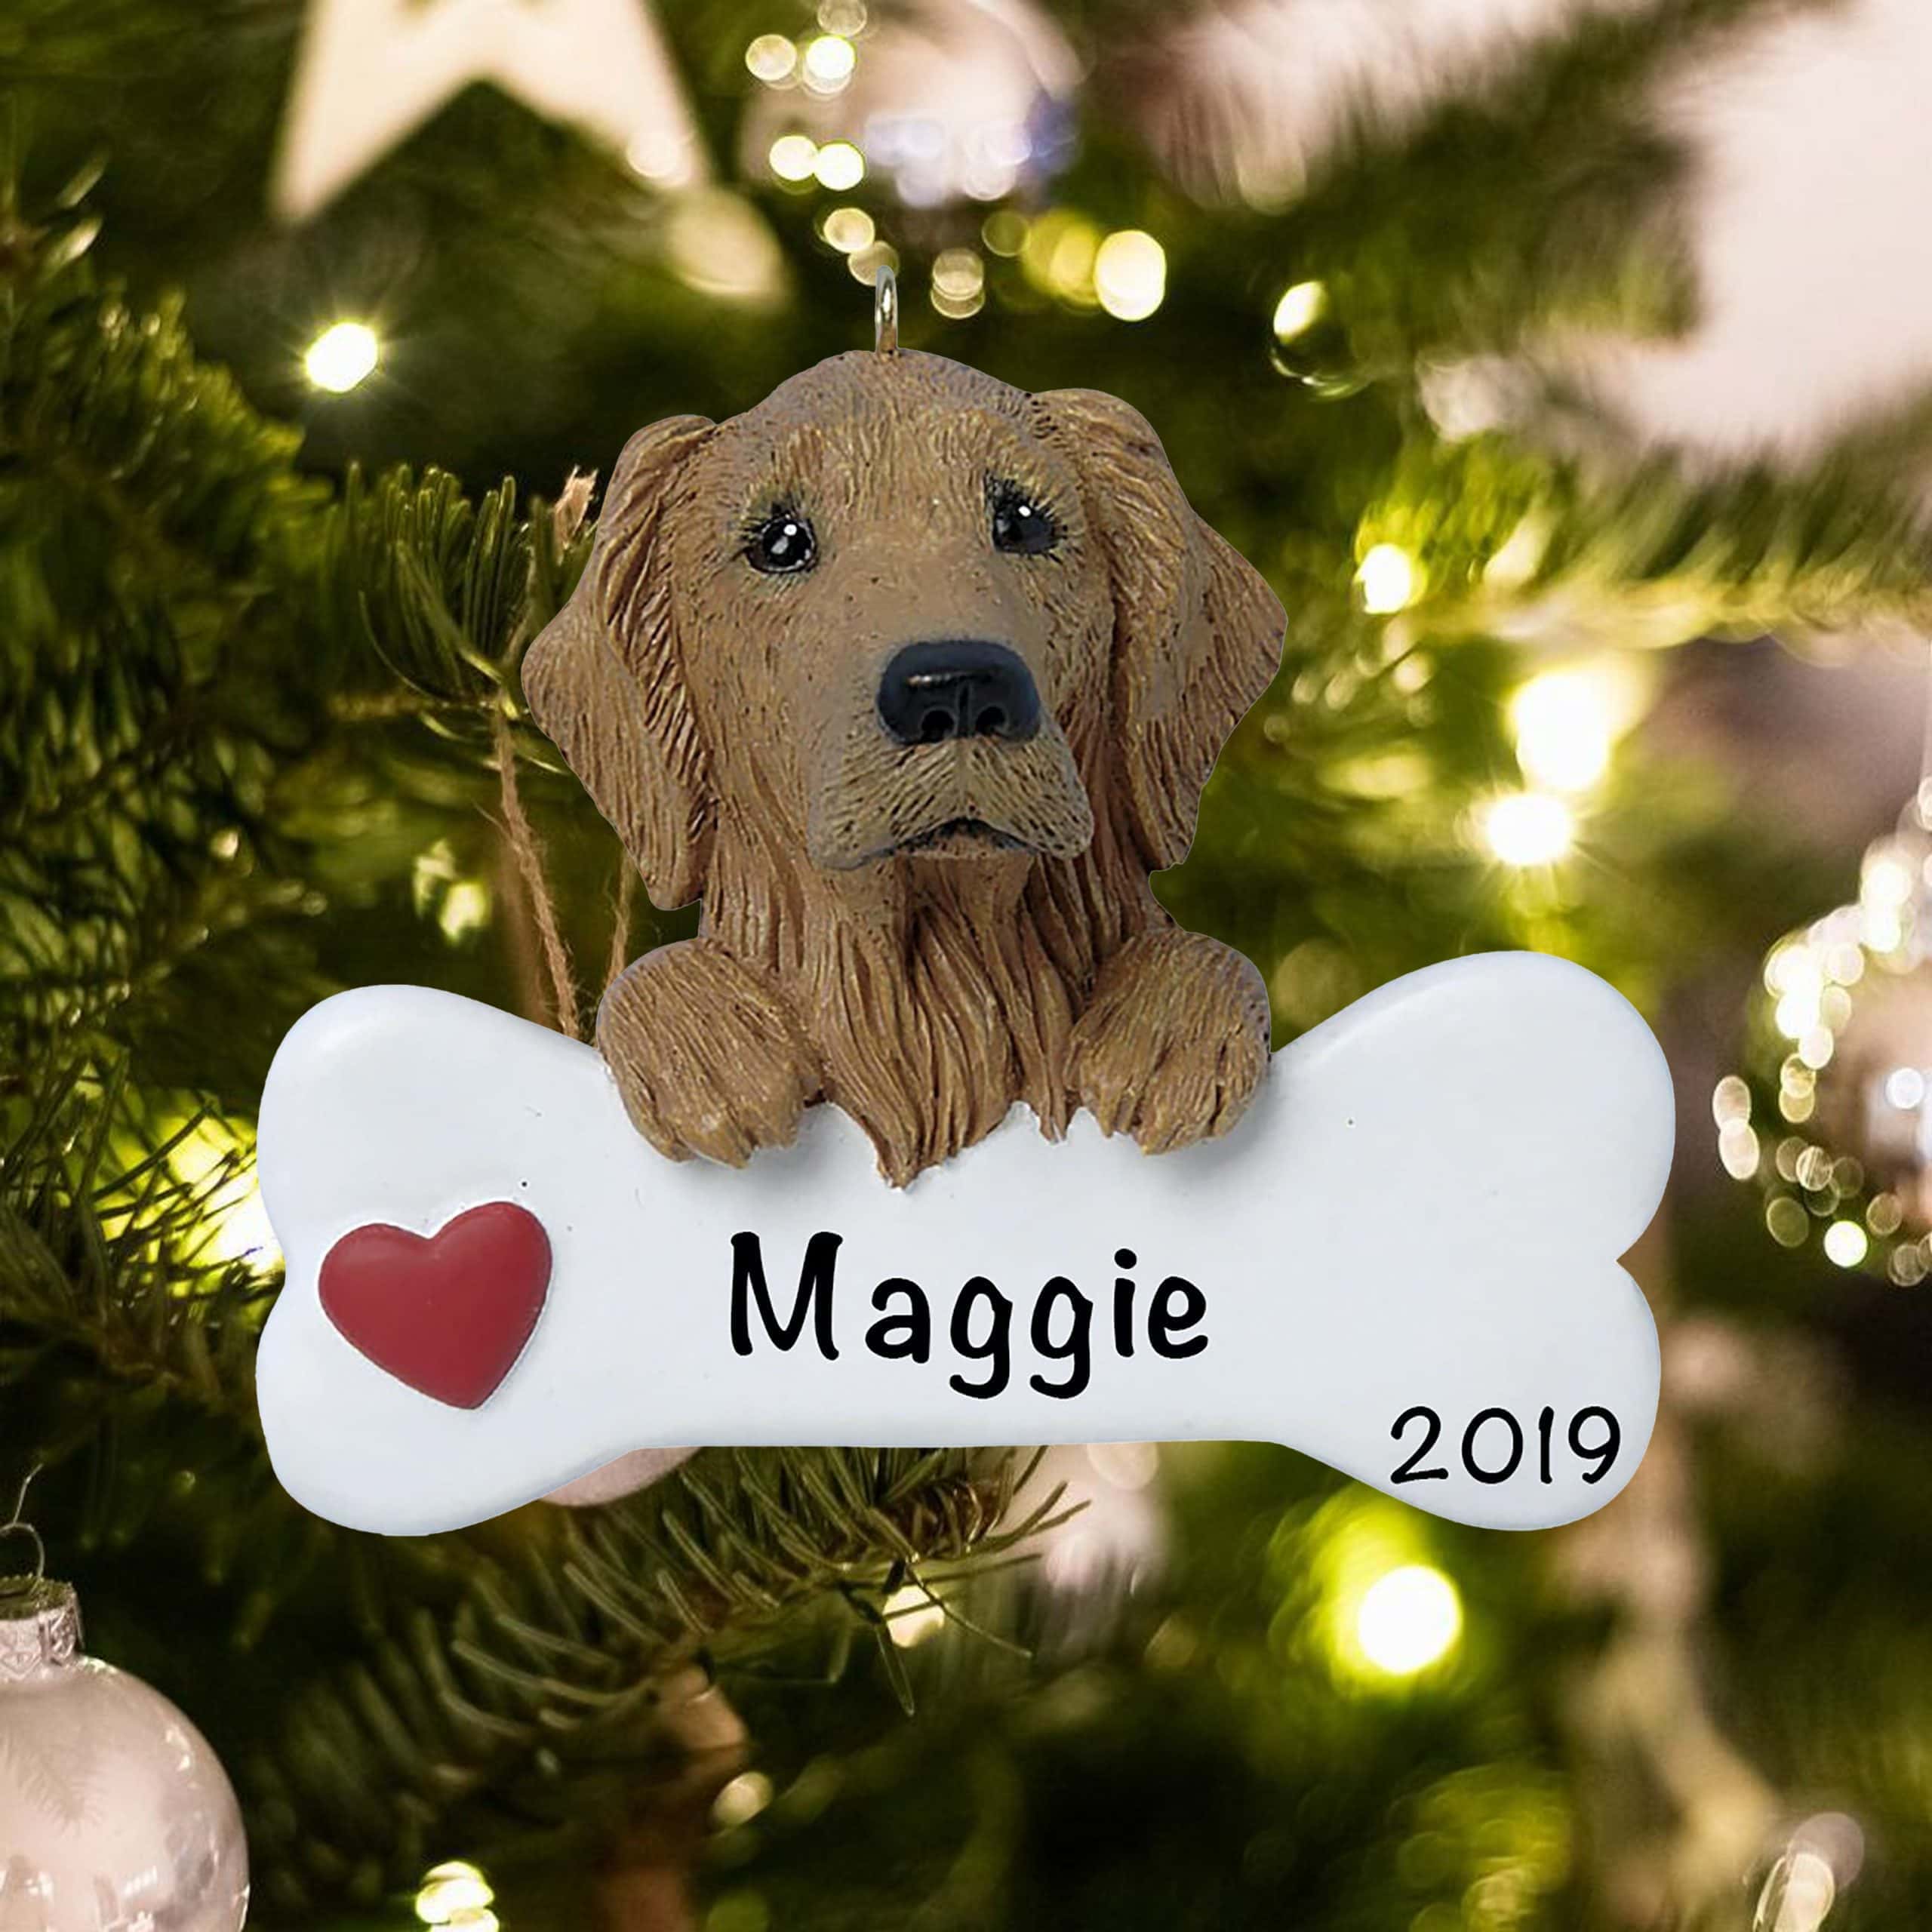 GOLDEN RETRIEVER DOG ON BONE WITH HEART PERSONALIZED ORNAMENT